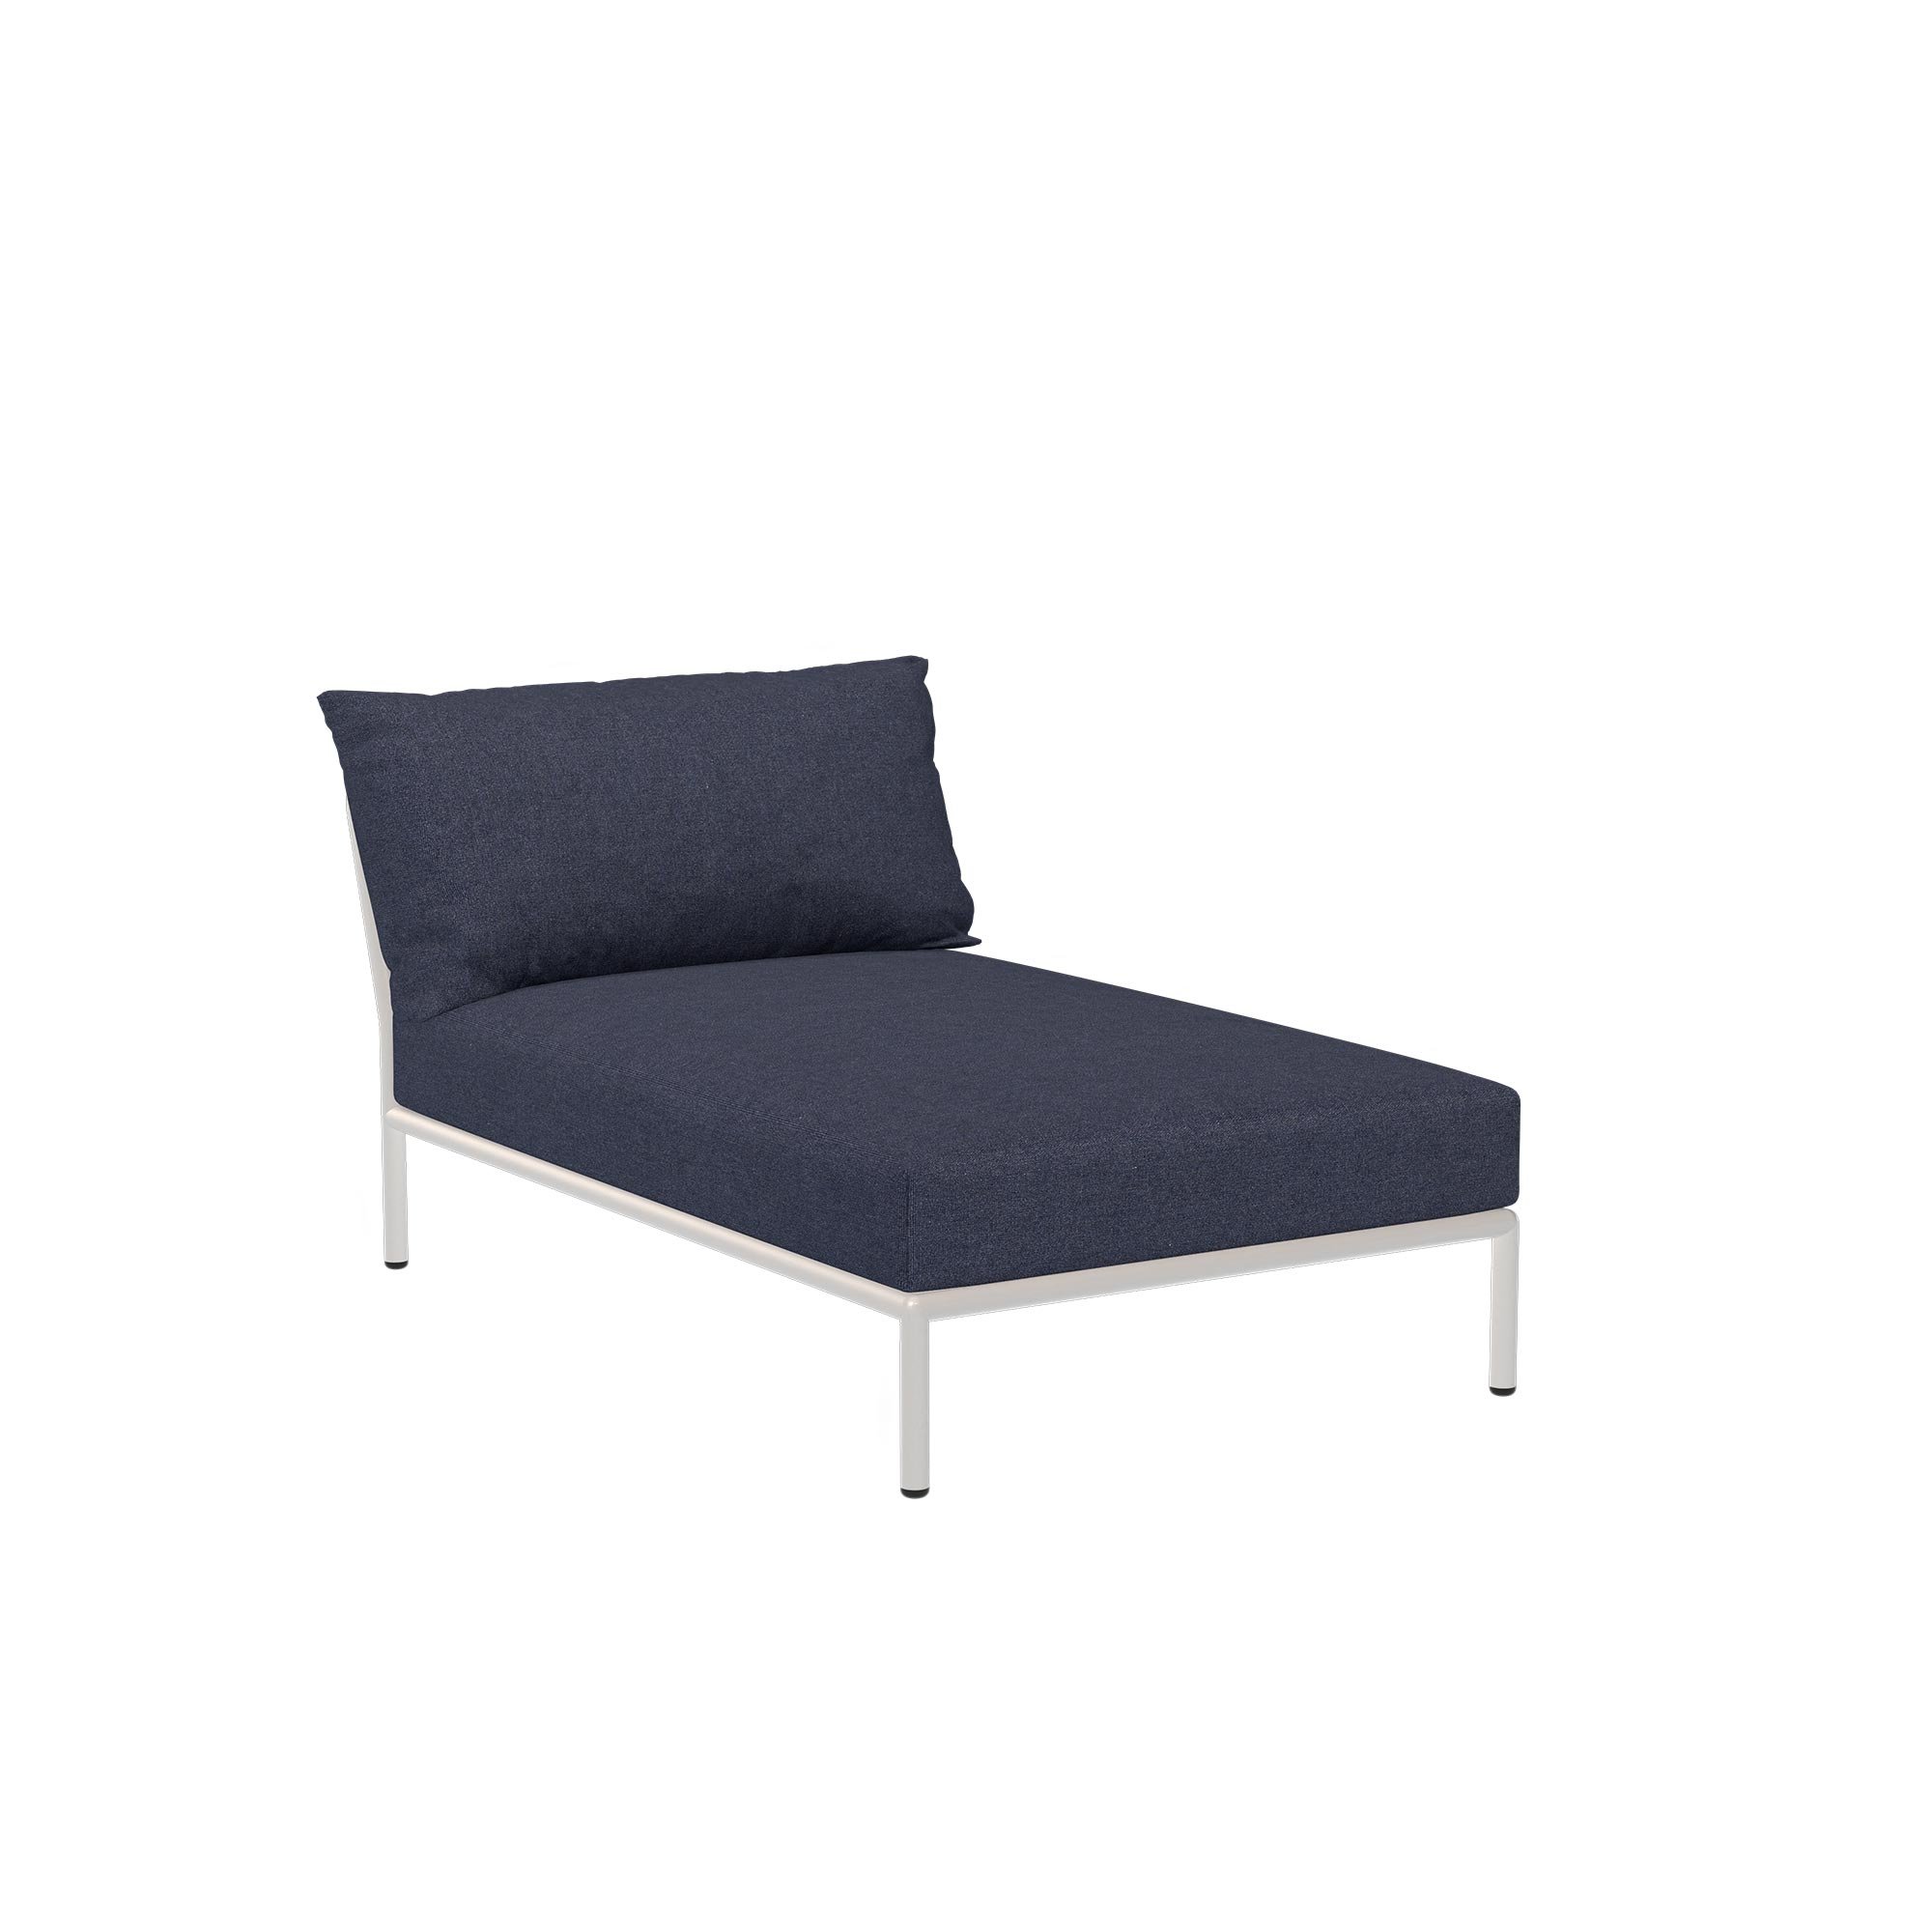 Houe Level 2 Outdoor Chaiselongue Muted white